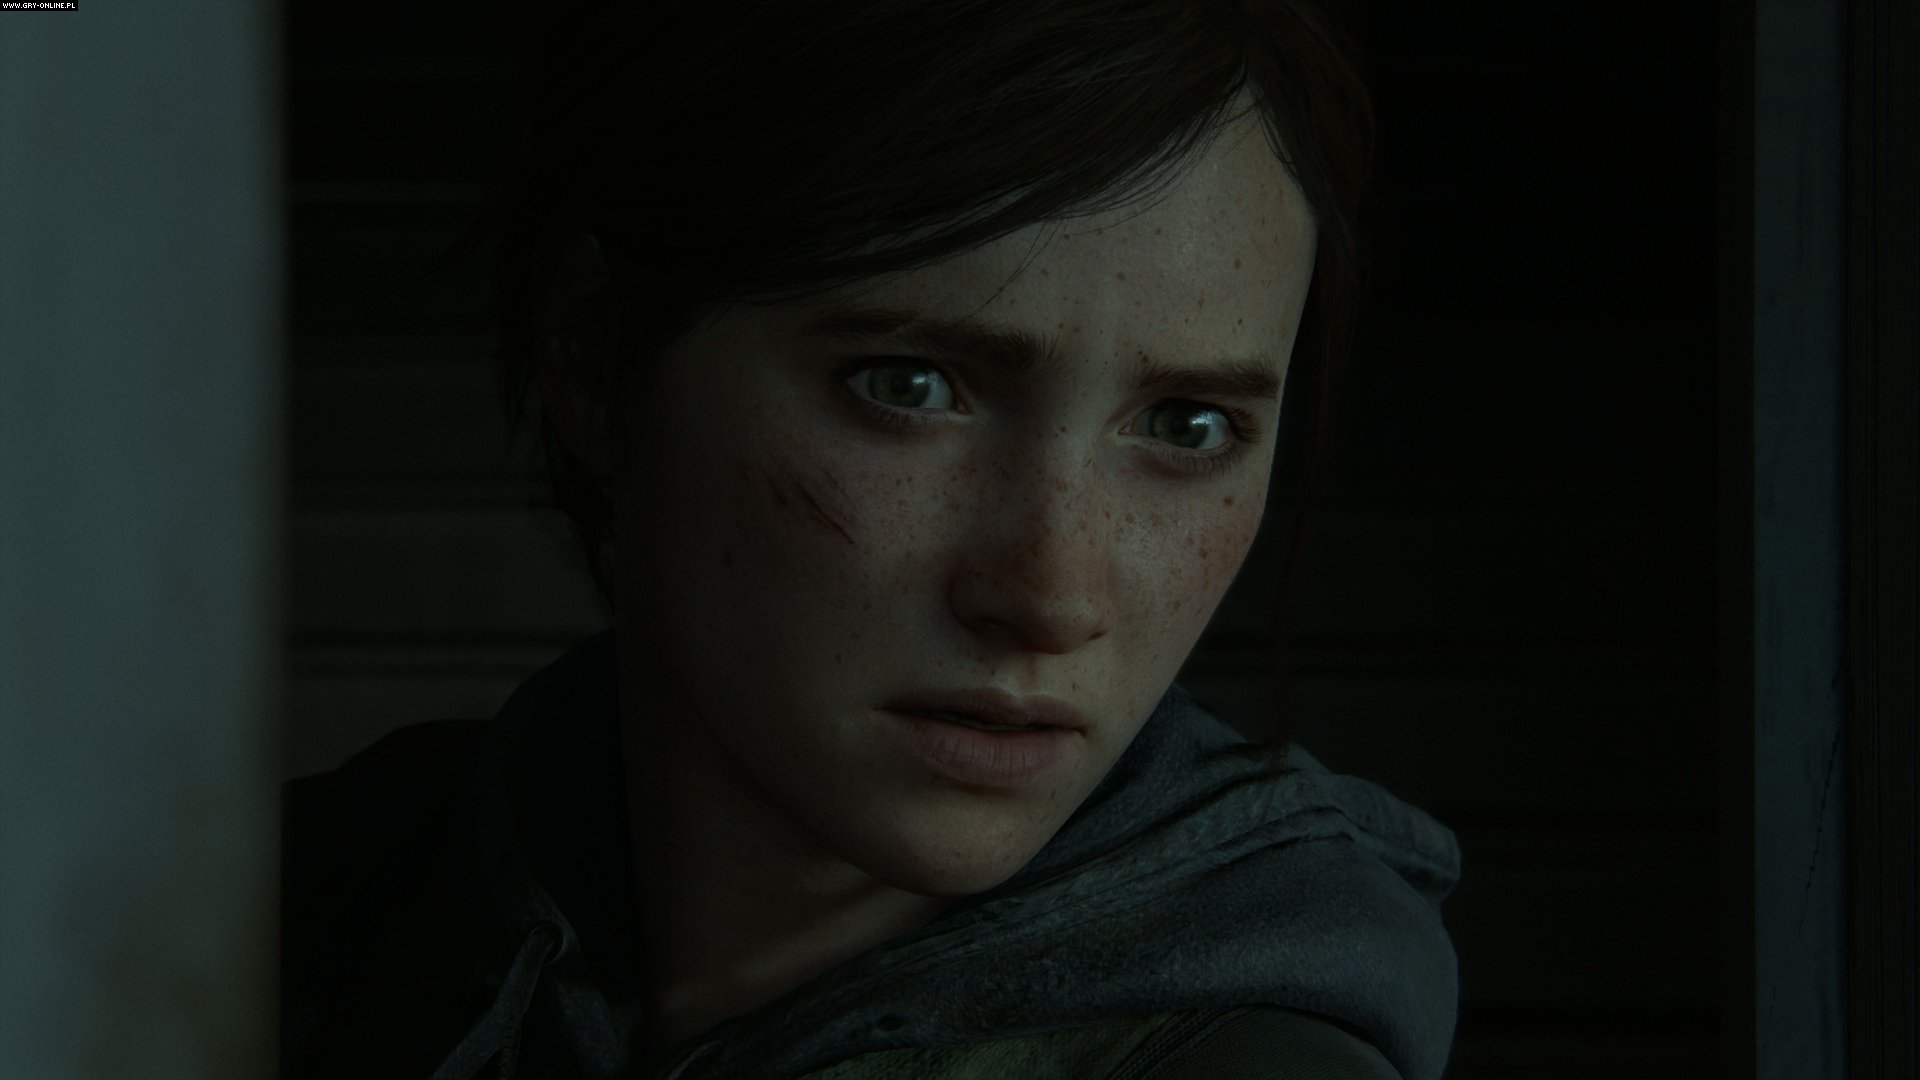 the last of us 2 pc version